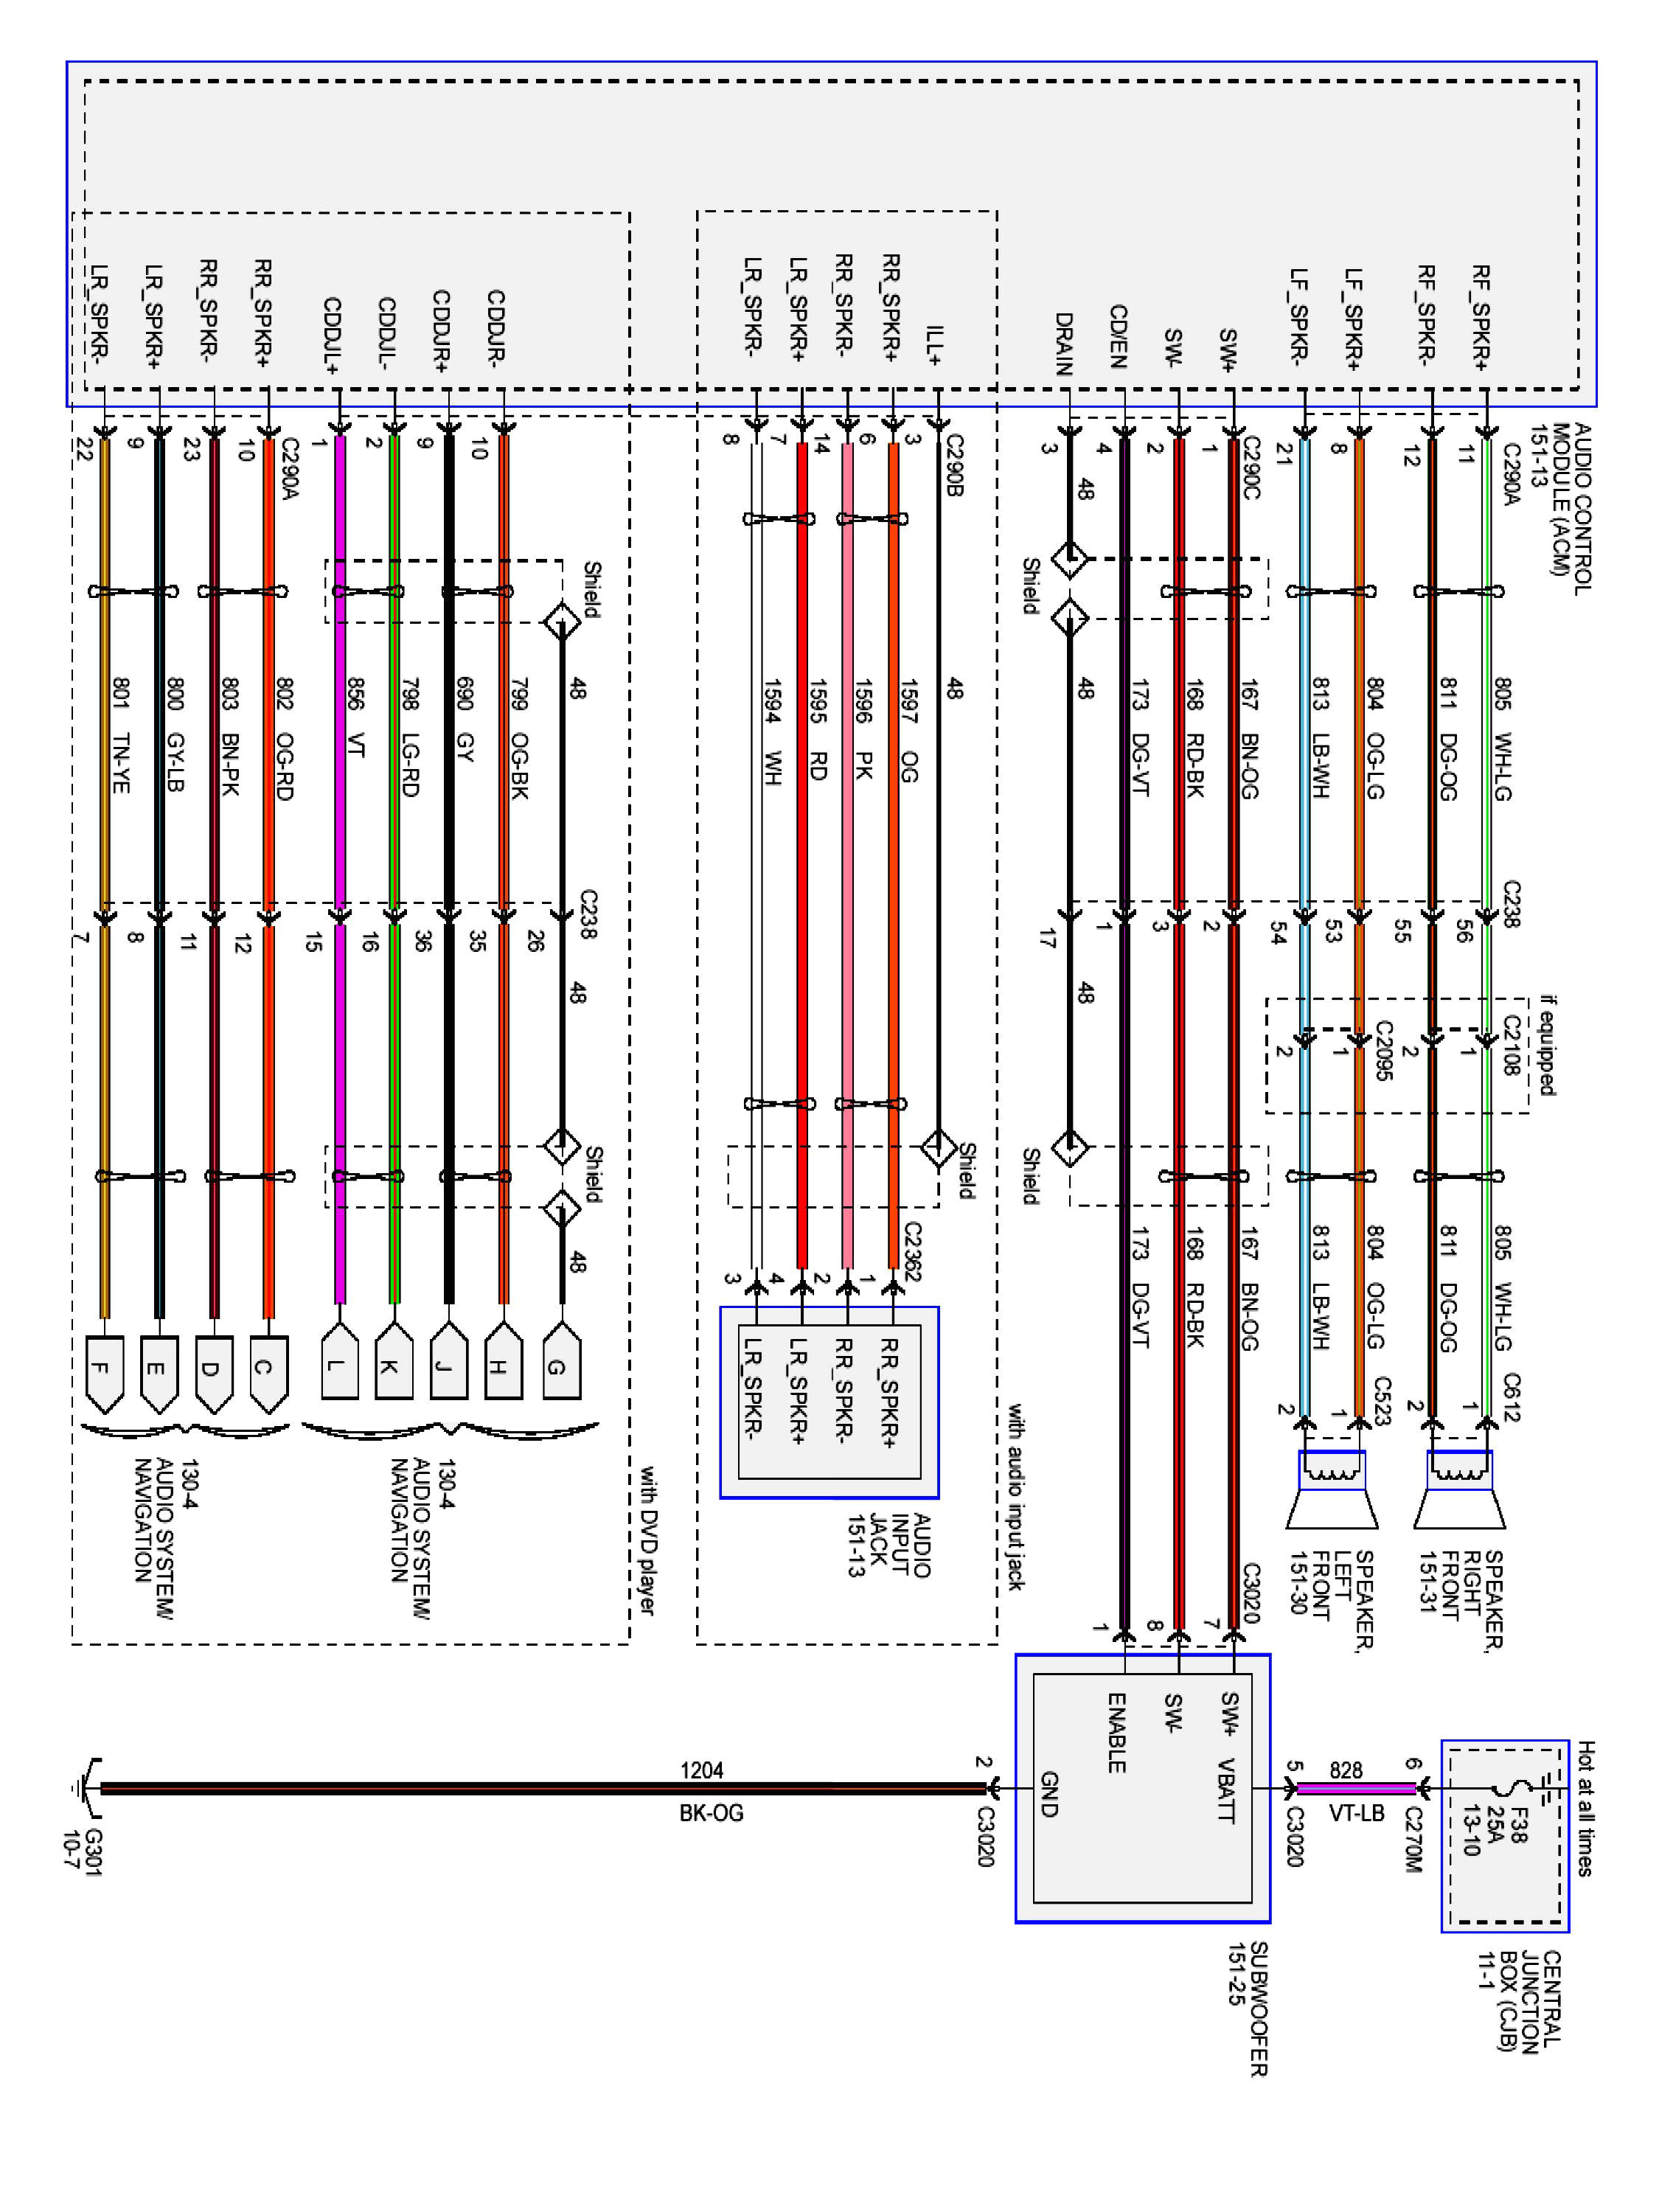 1991 ford f 150 radio wiring harness wiring diagrams terms 1991 ford f 150 radio wiring diagram